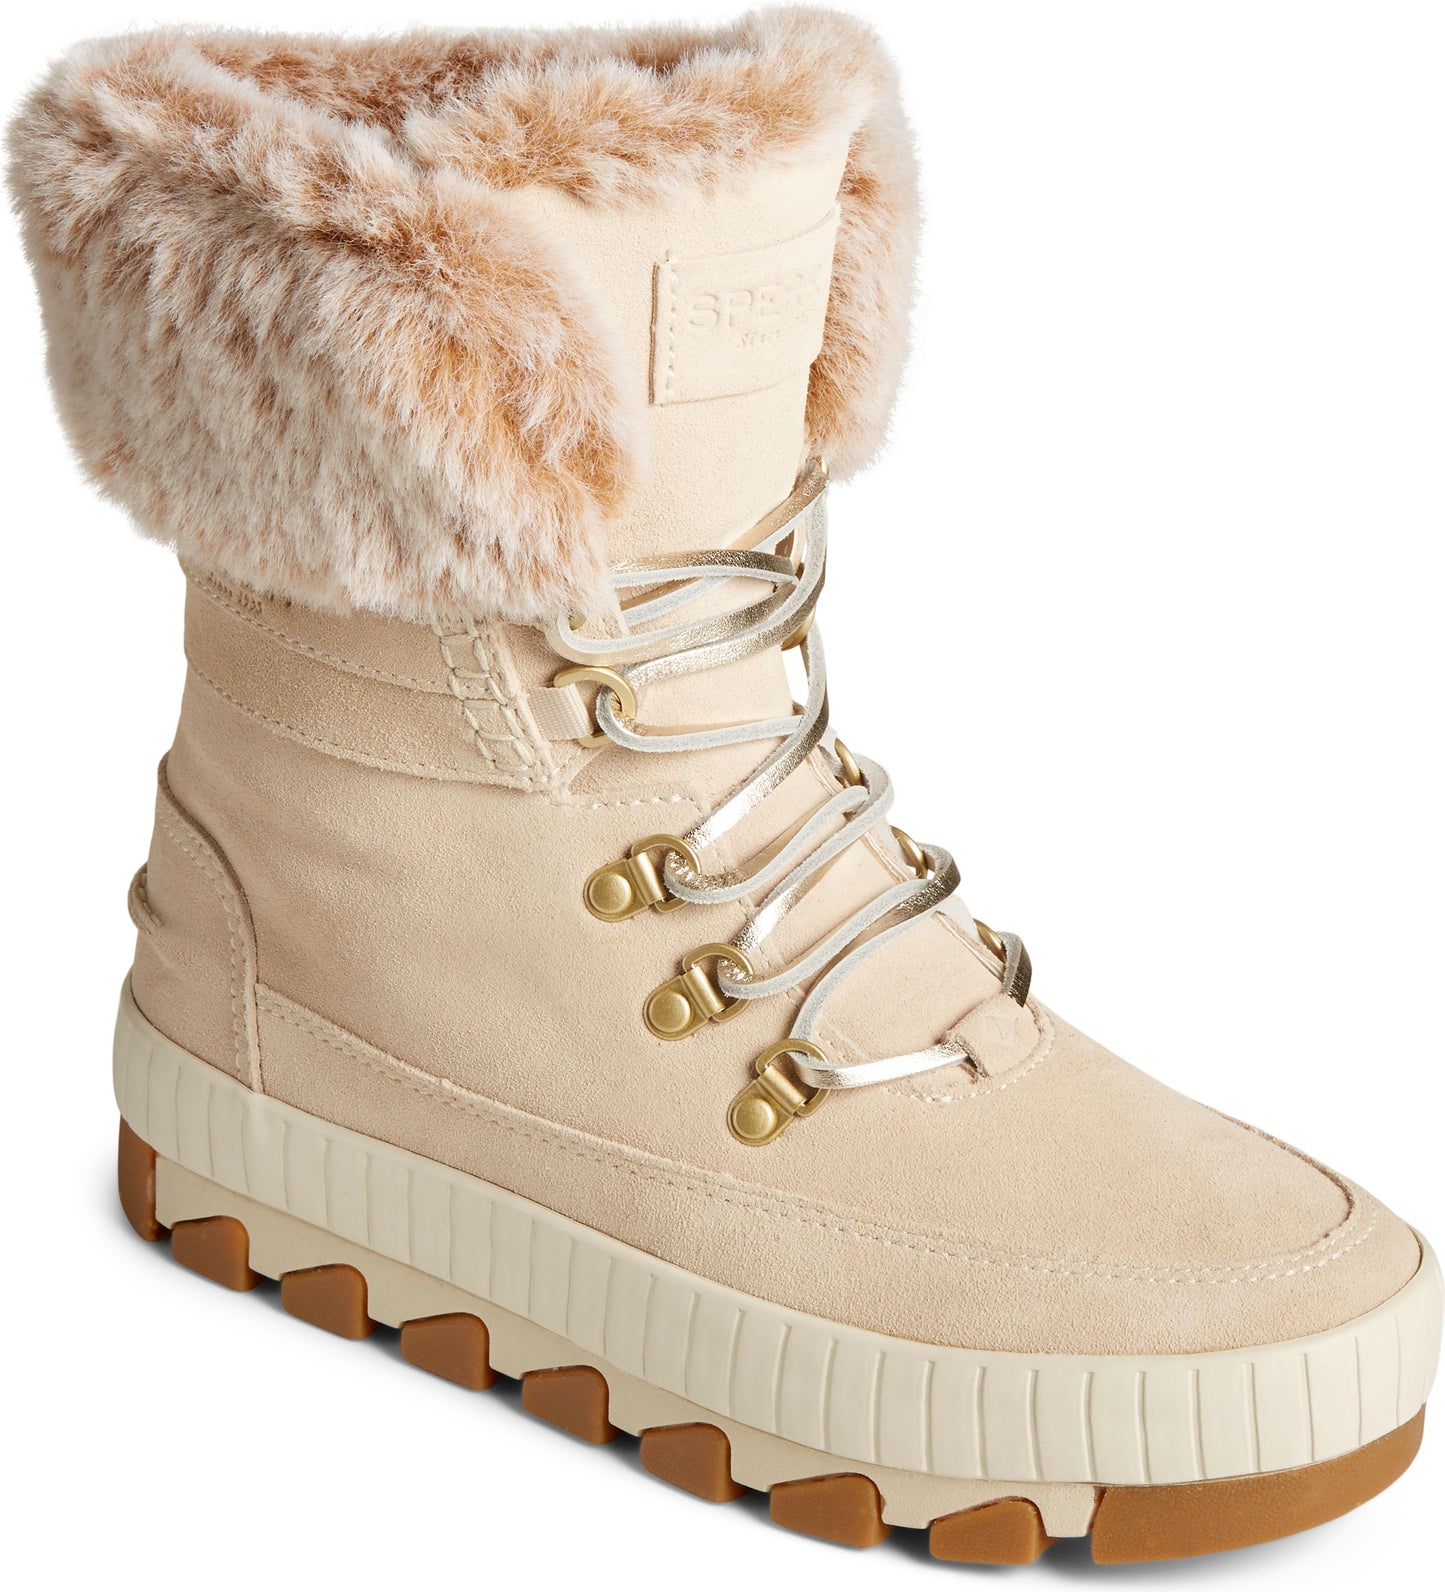 Sperry Boots Torrent Winter Lace Up Boot Ivory